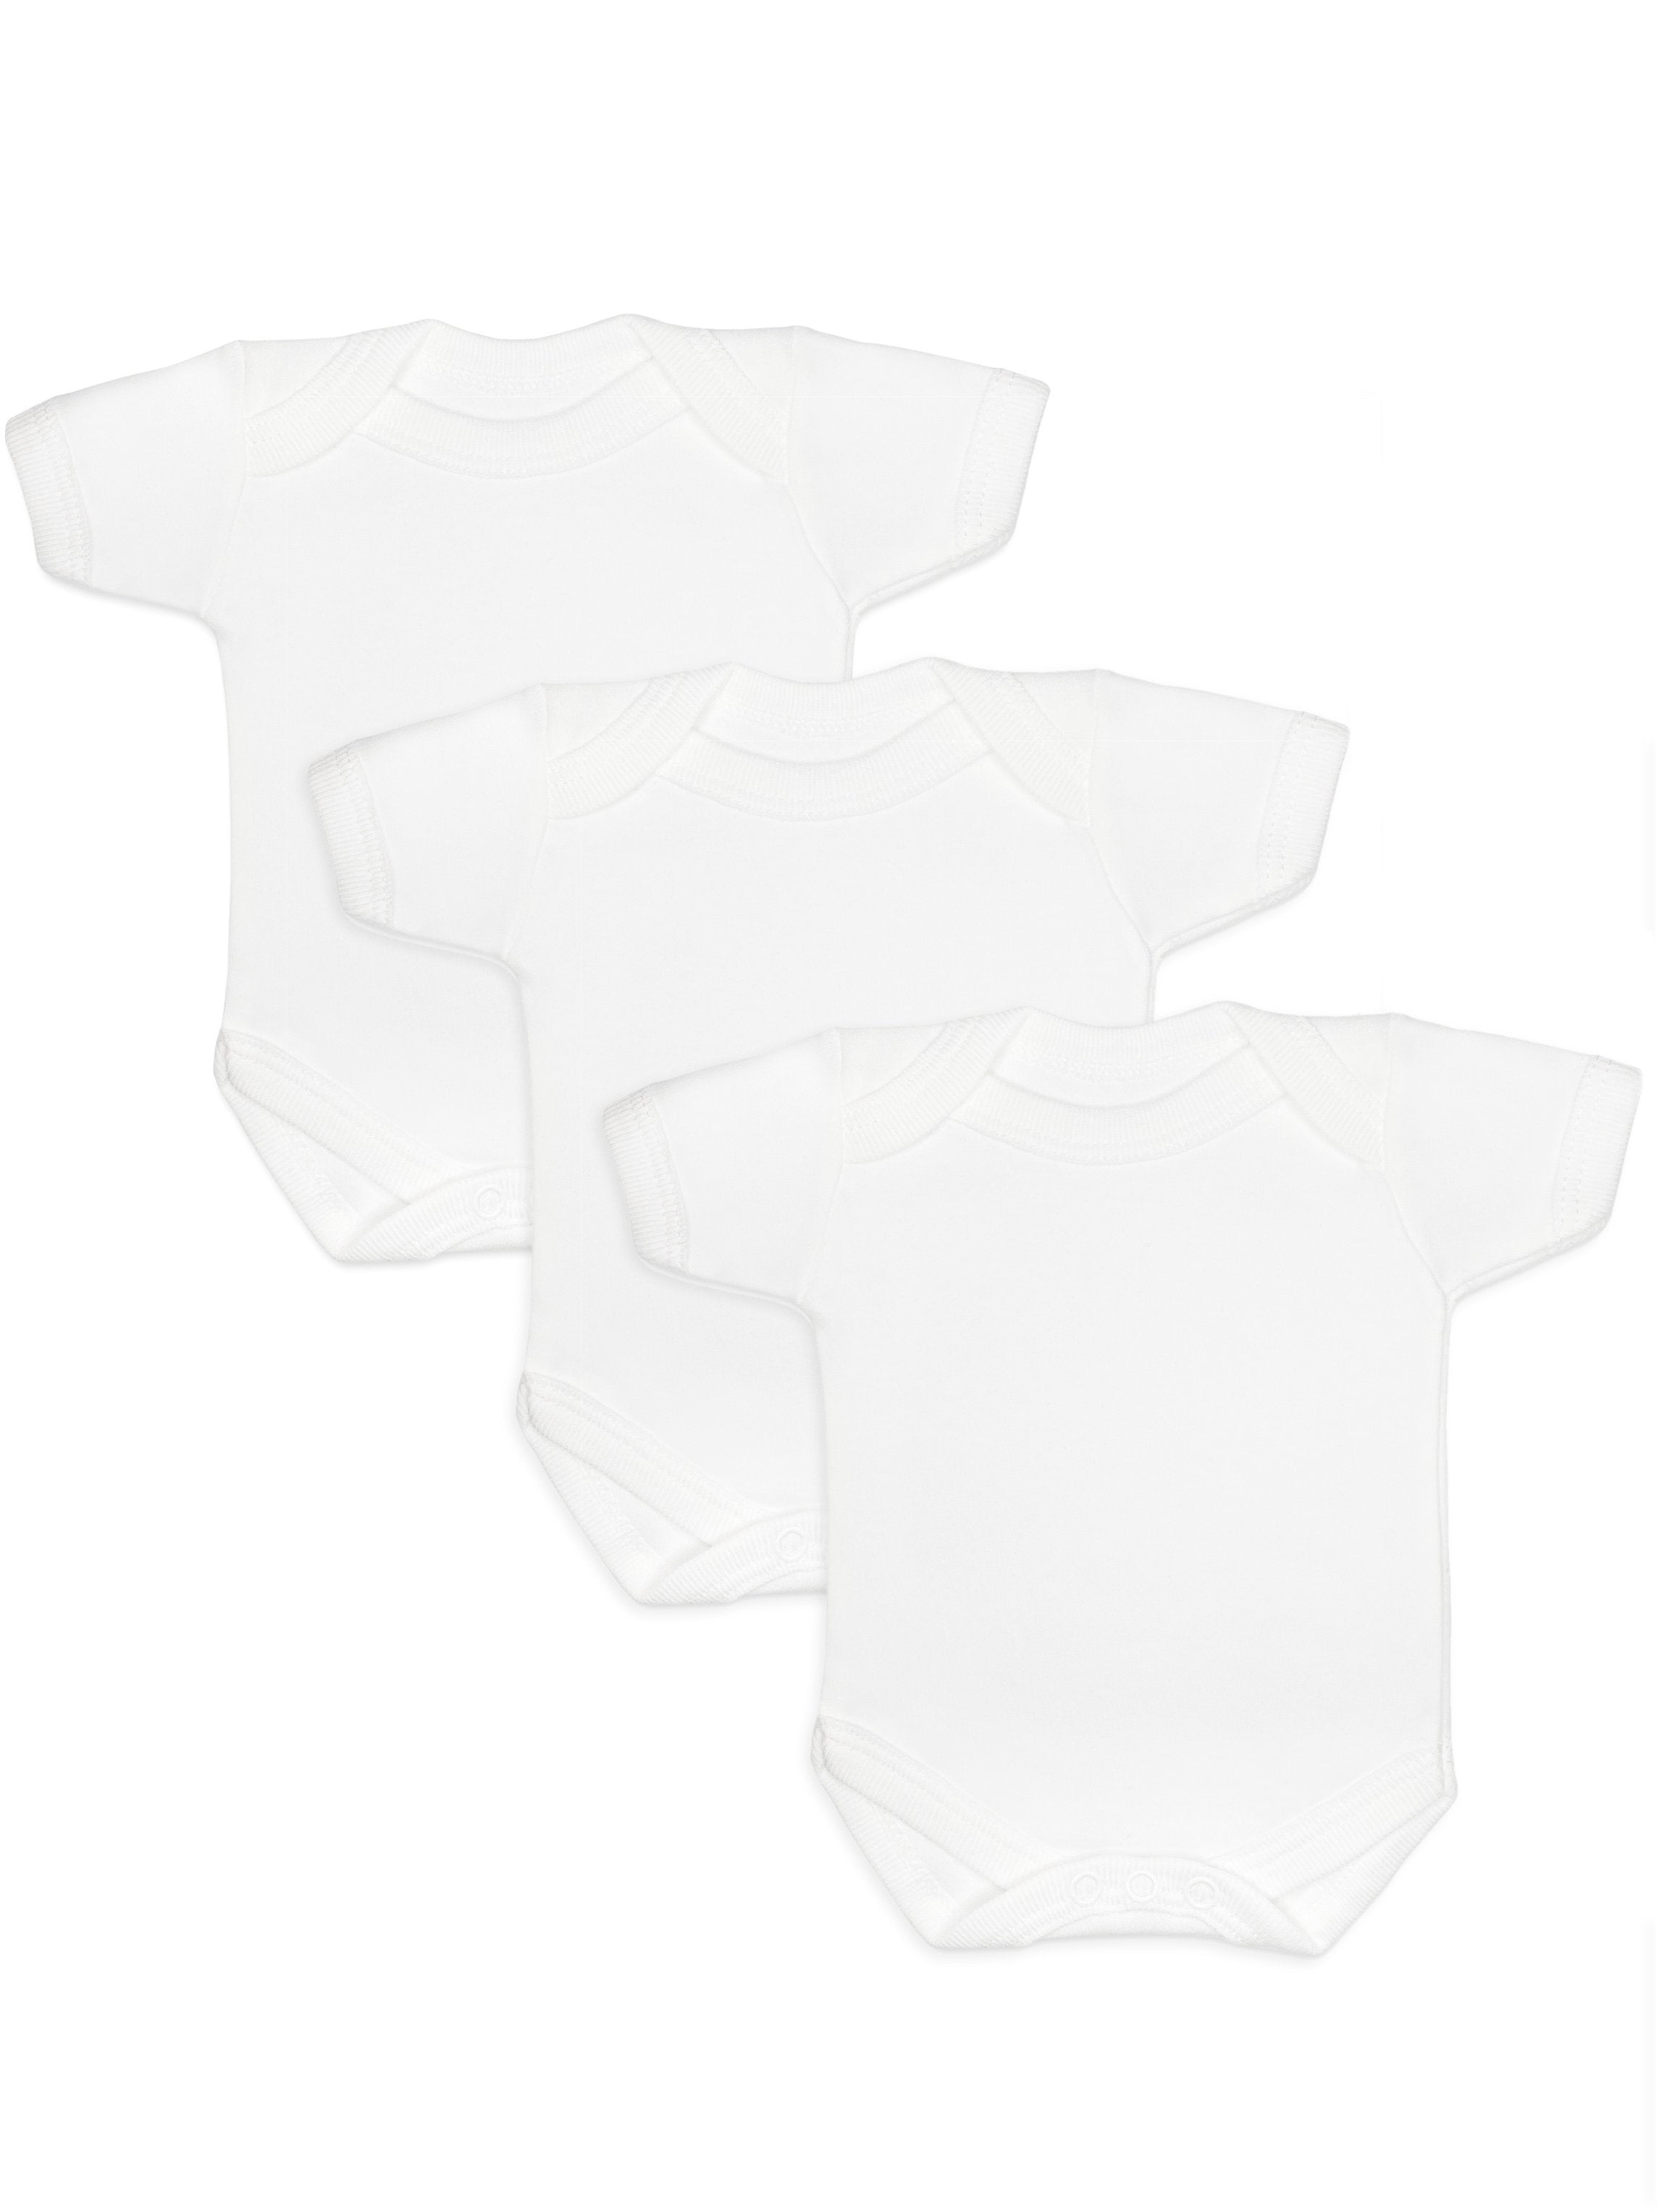 3 Pack - 100% Cotton White Short Sleeved Bodysuits Set/Multipack Little Mouse Baby Clothing & Gifts 